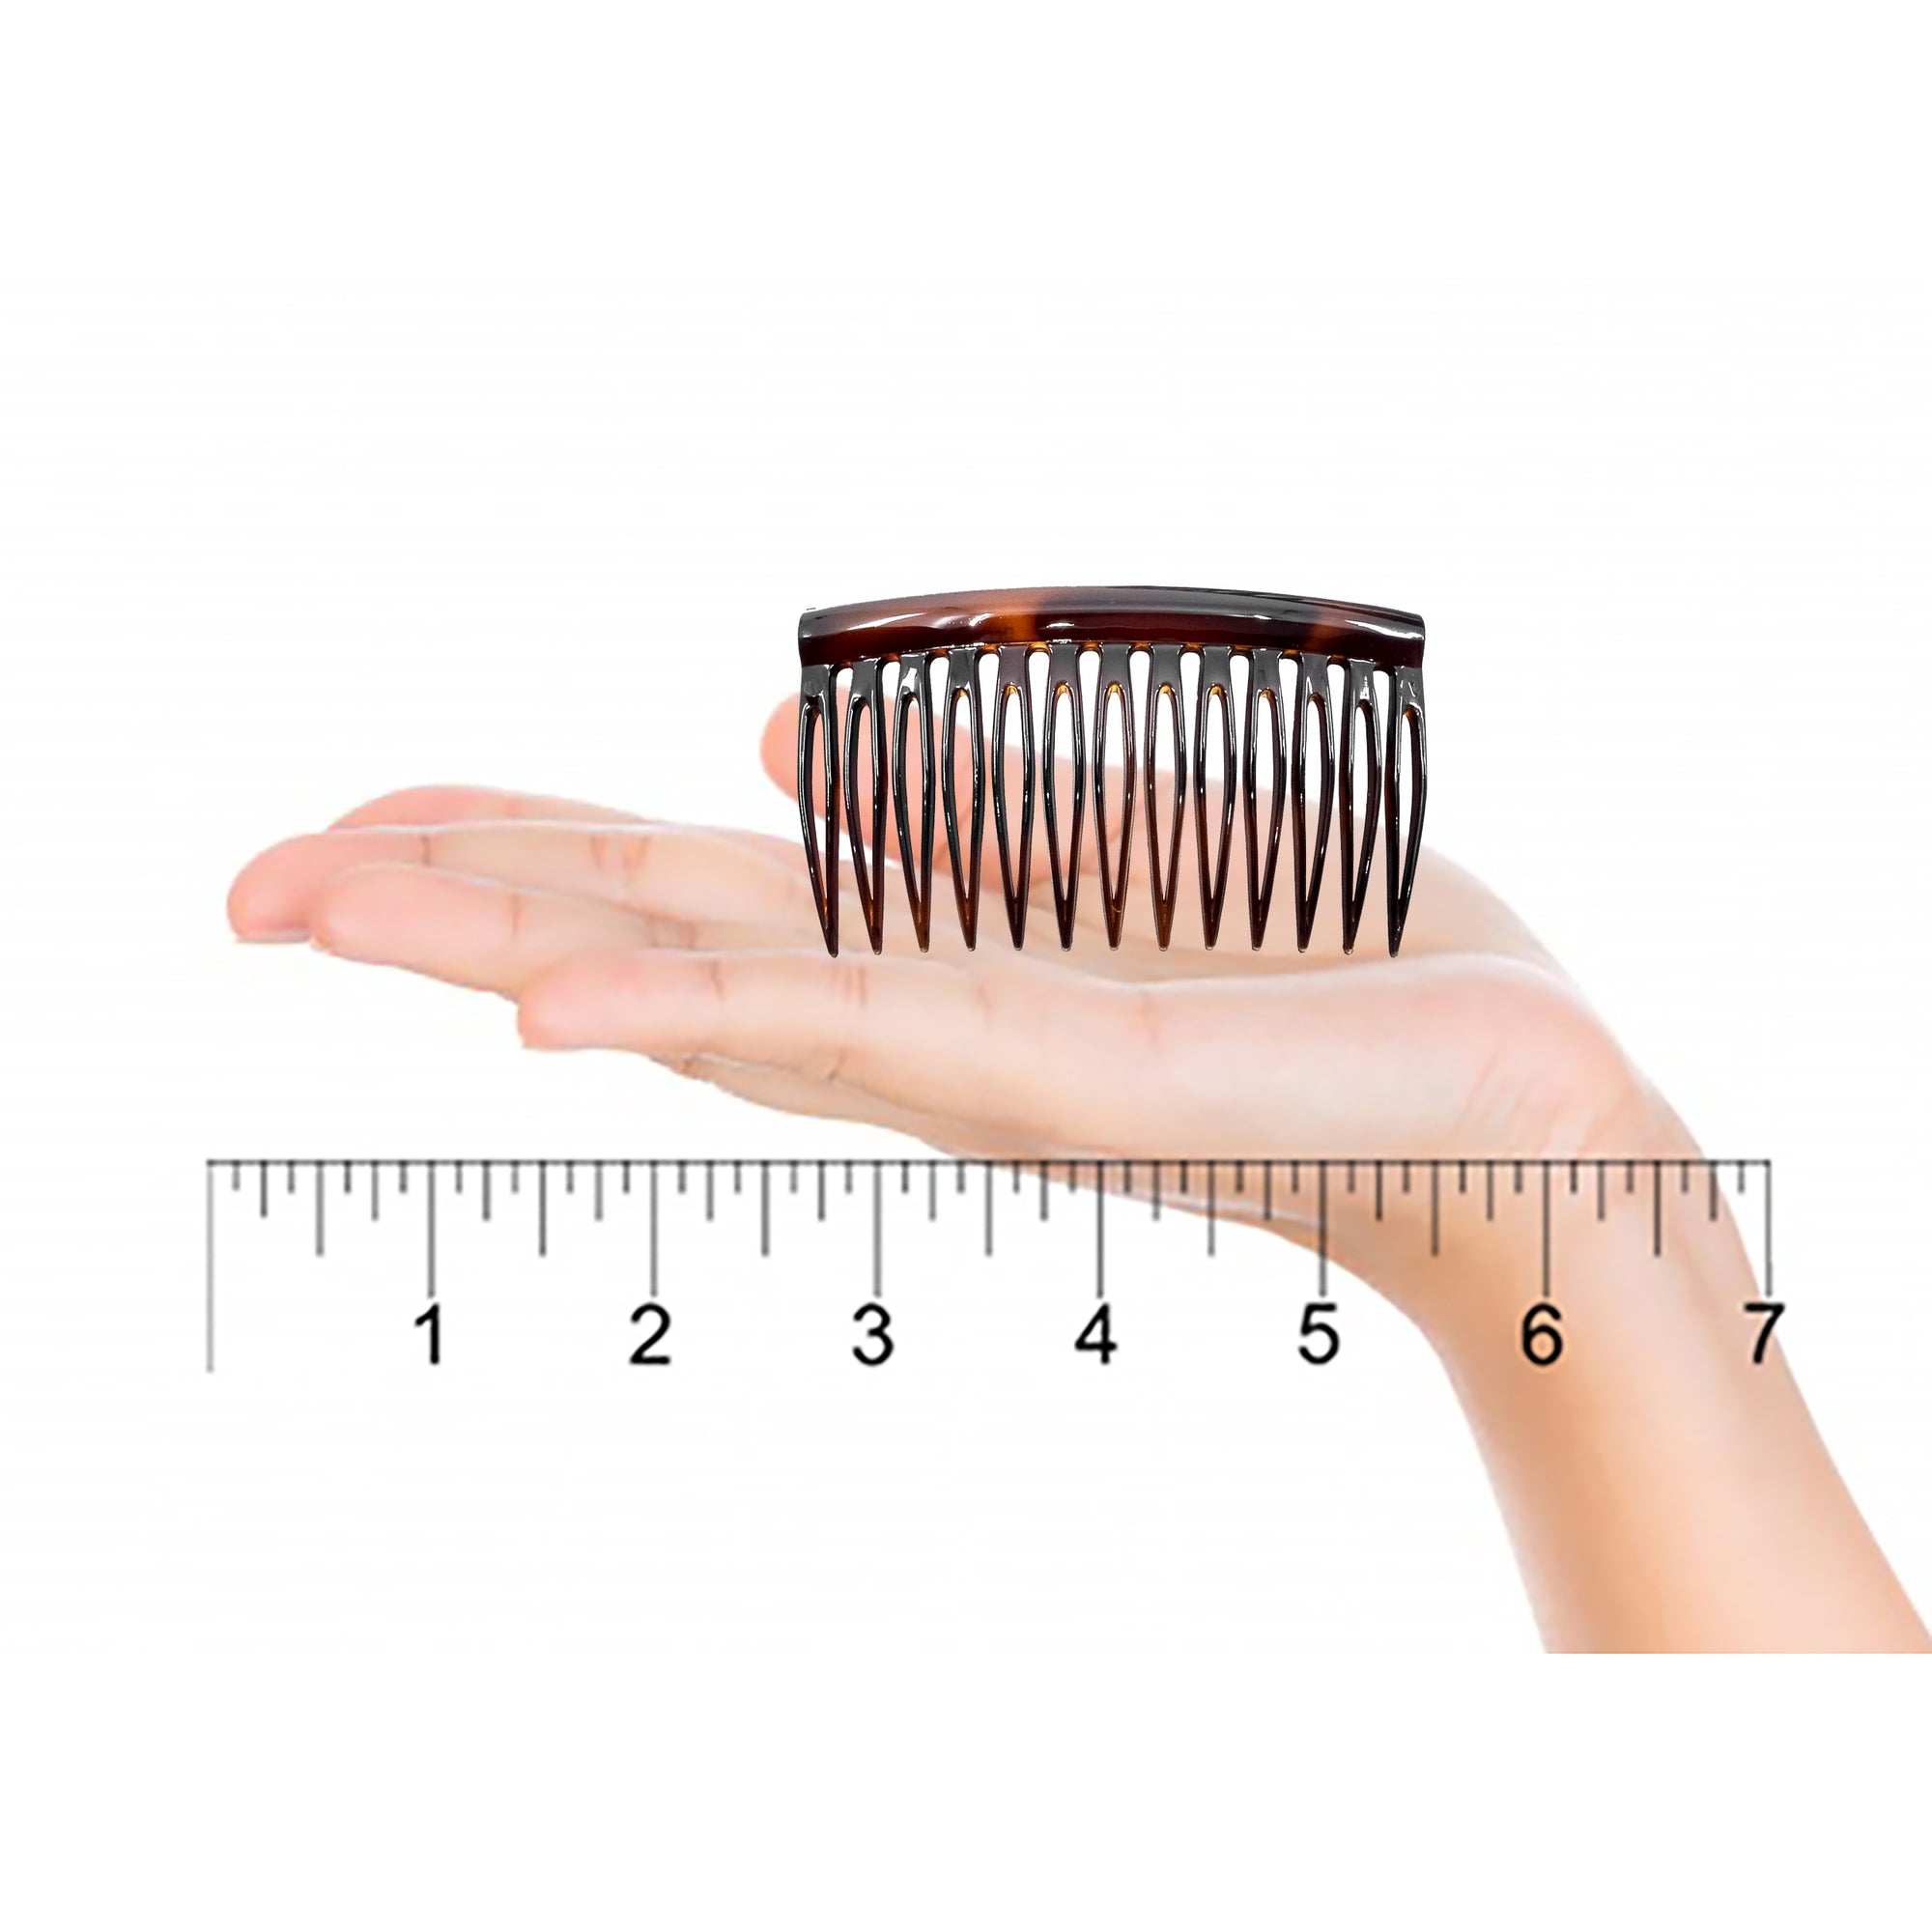 Camila Paris AD825-2 Tortoise Shell French Hair Side Comb for Women